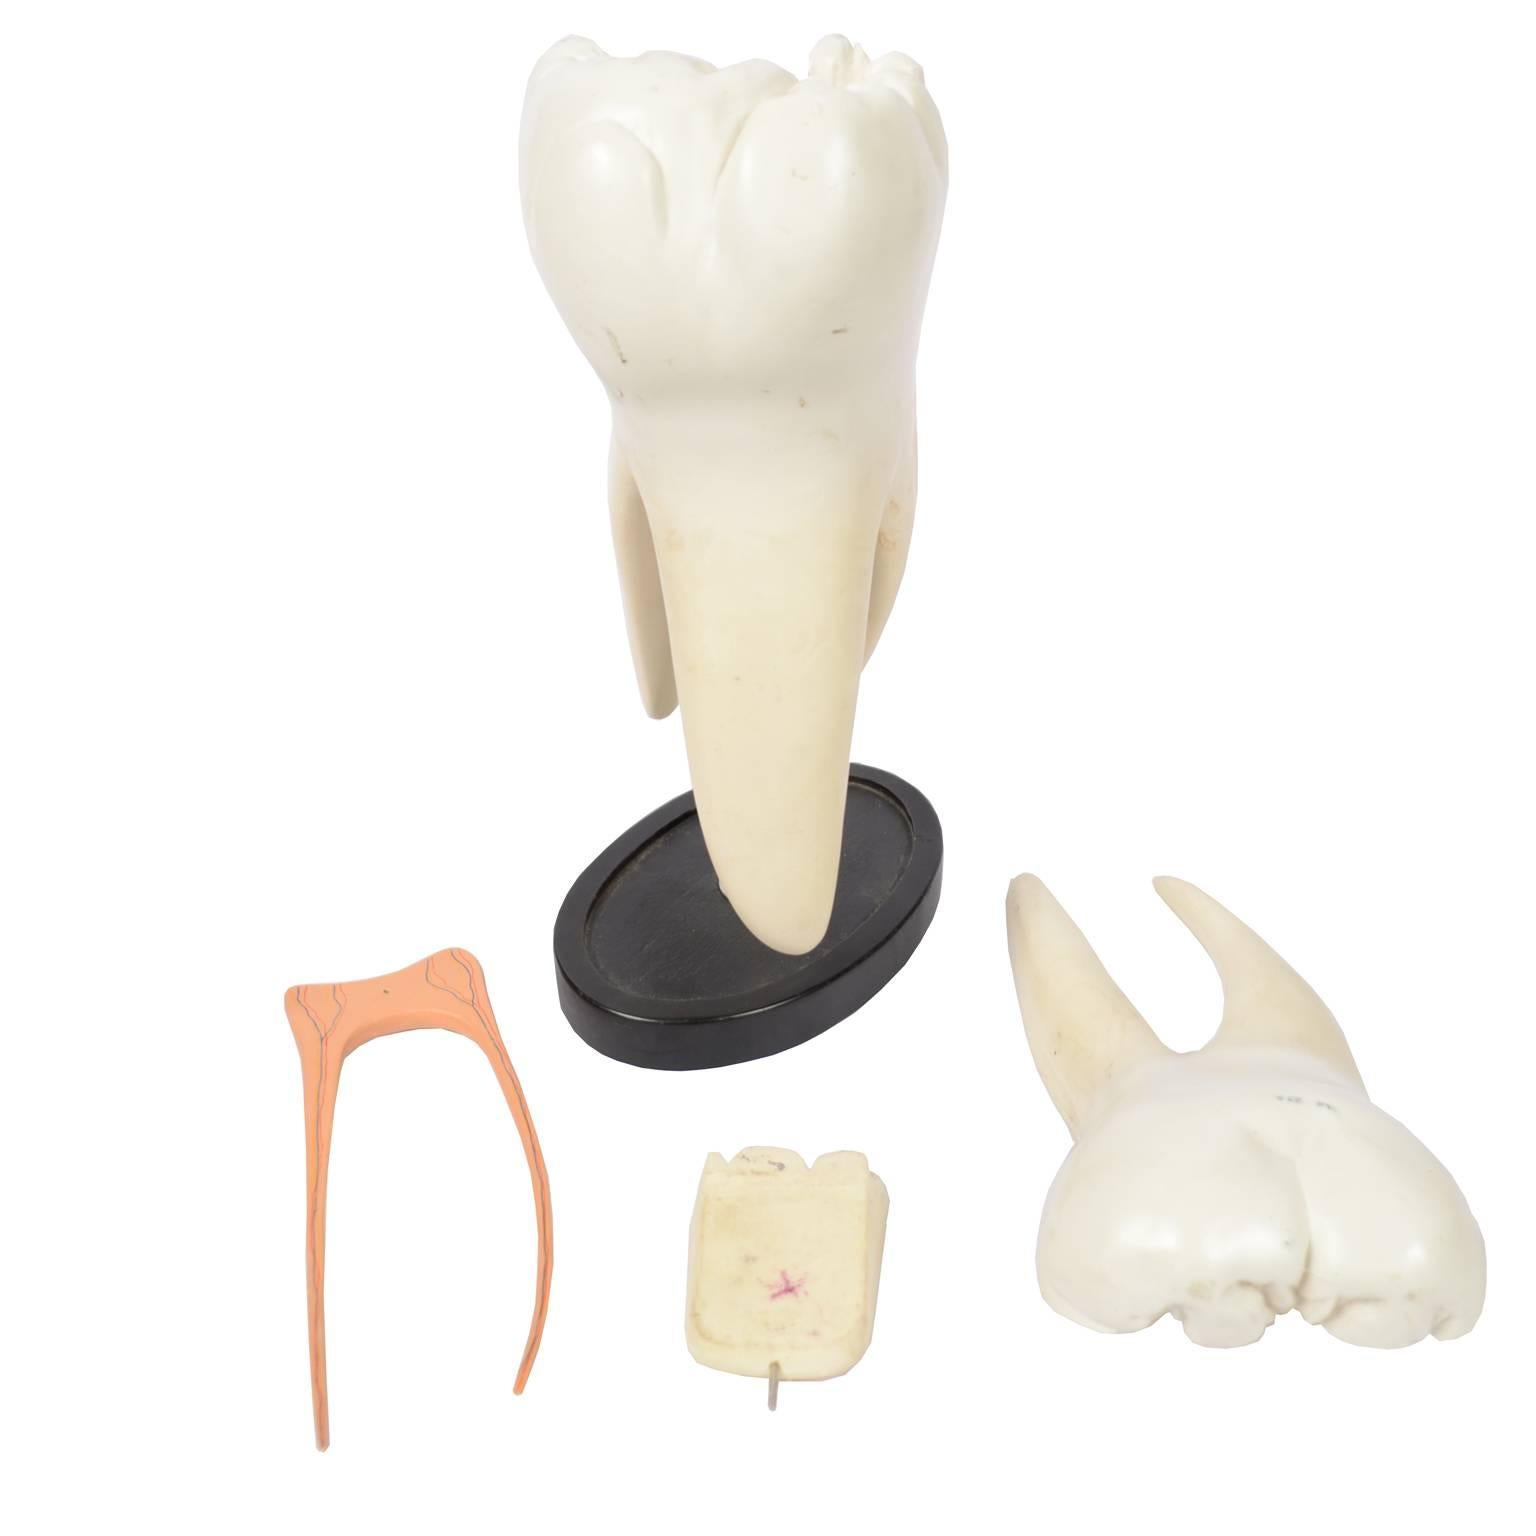 UK 1950s Educational Rubber Resin  Model of Molar Tooth Divisible in 4 Parts 2